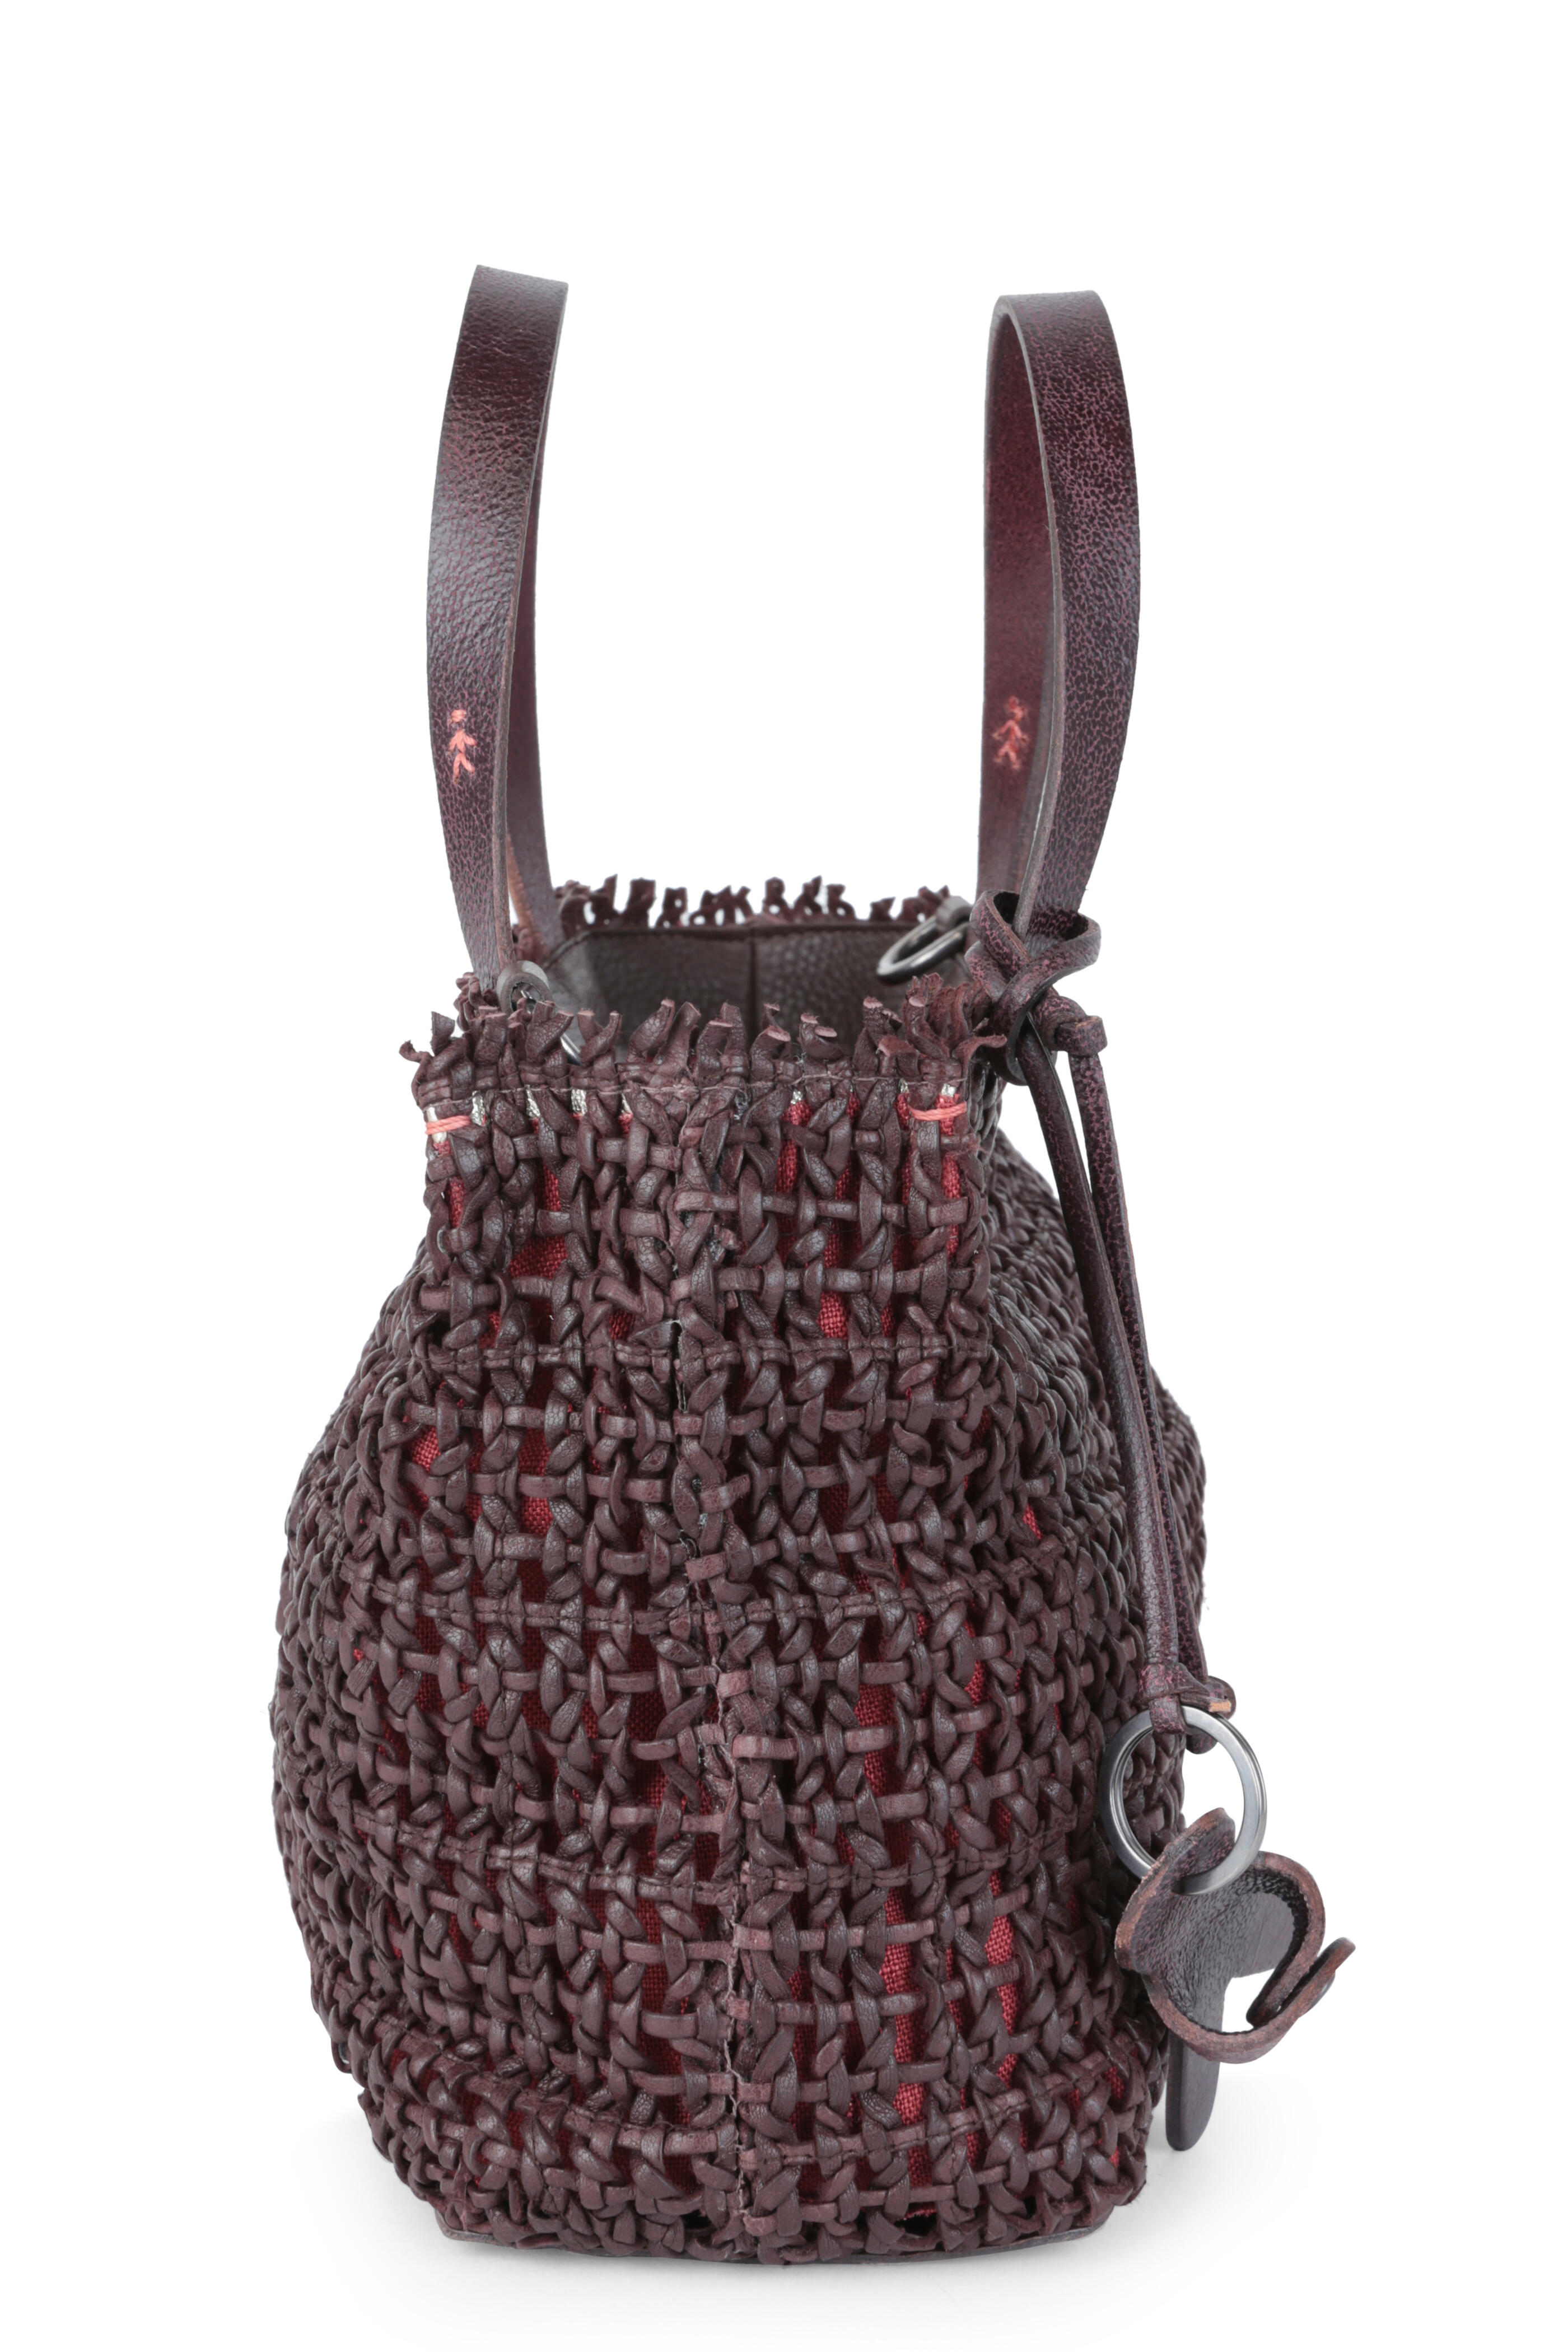 Henry Beguelin - Melodi Brown Woven Leather Small Tote